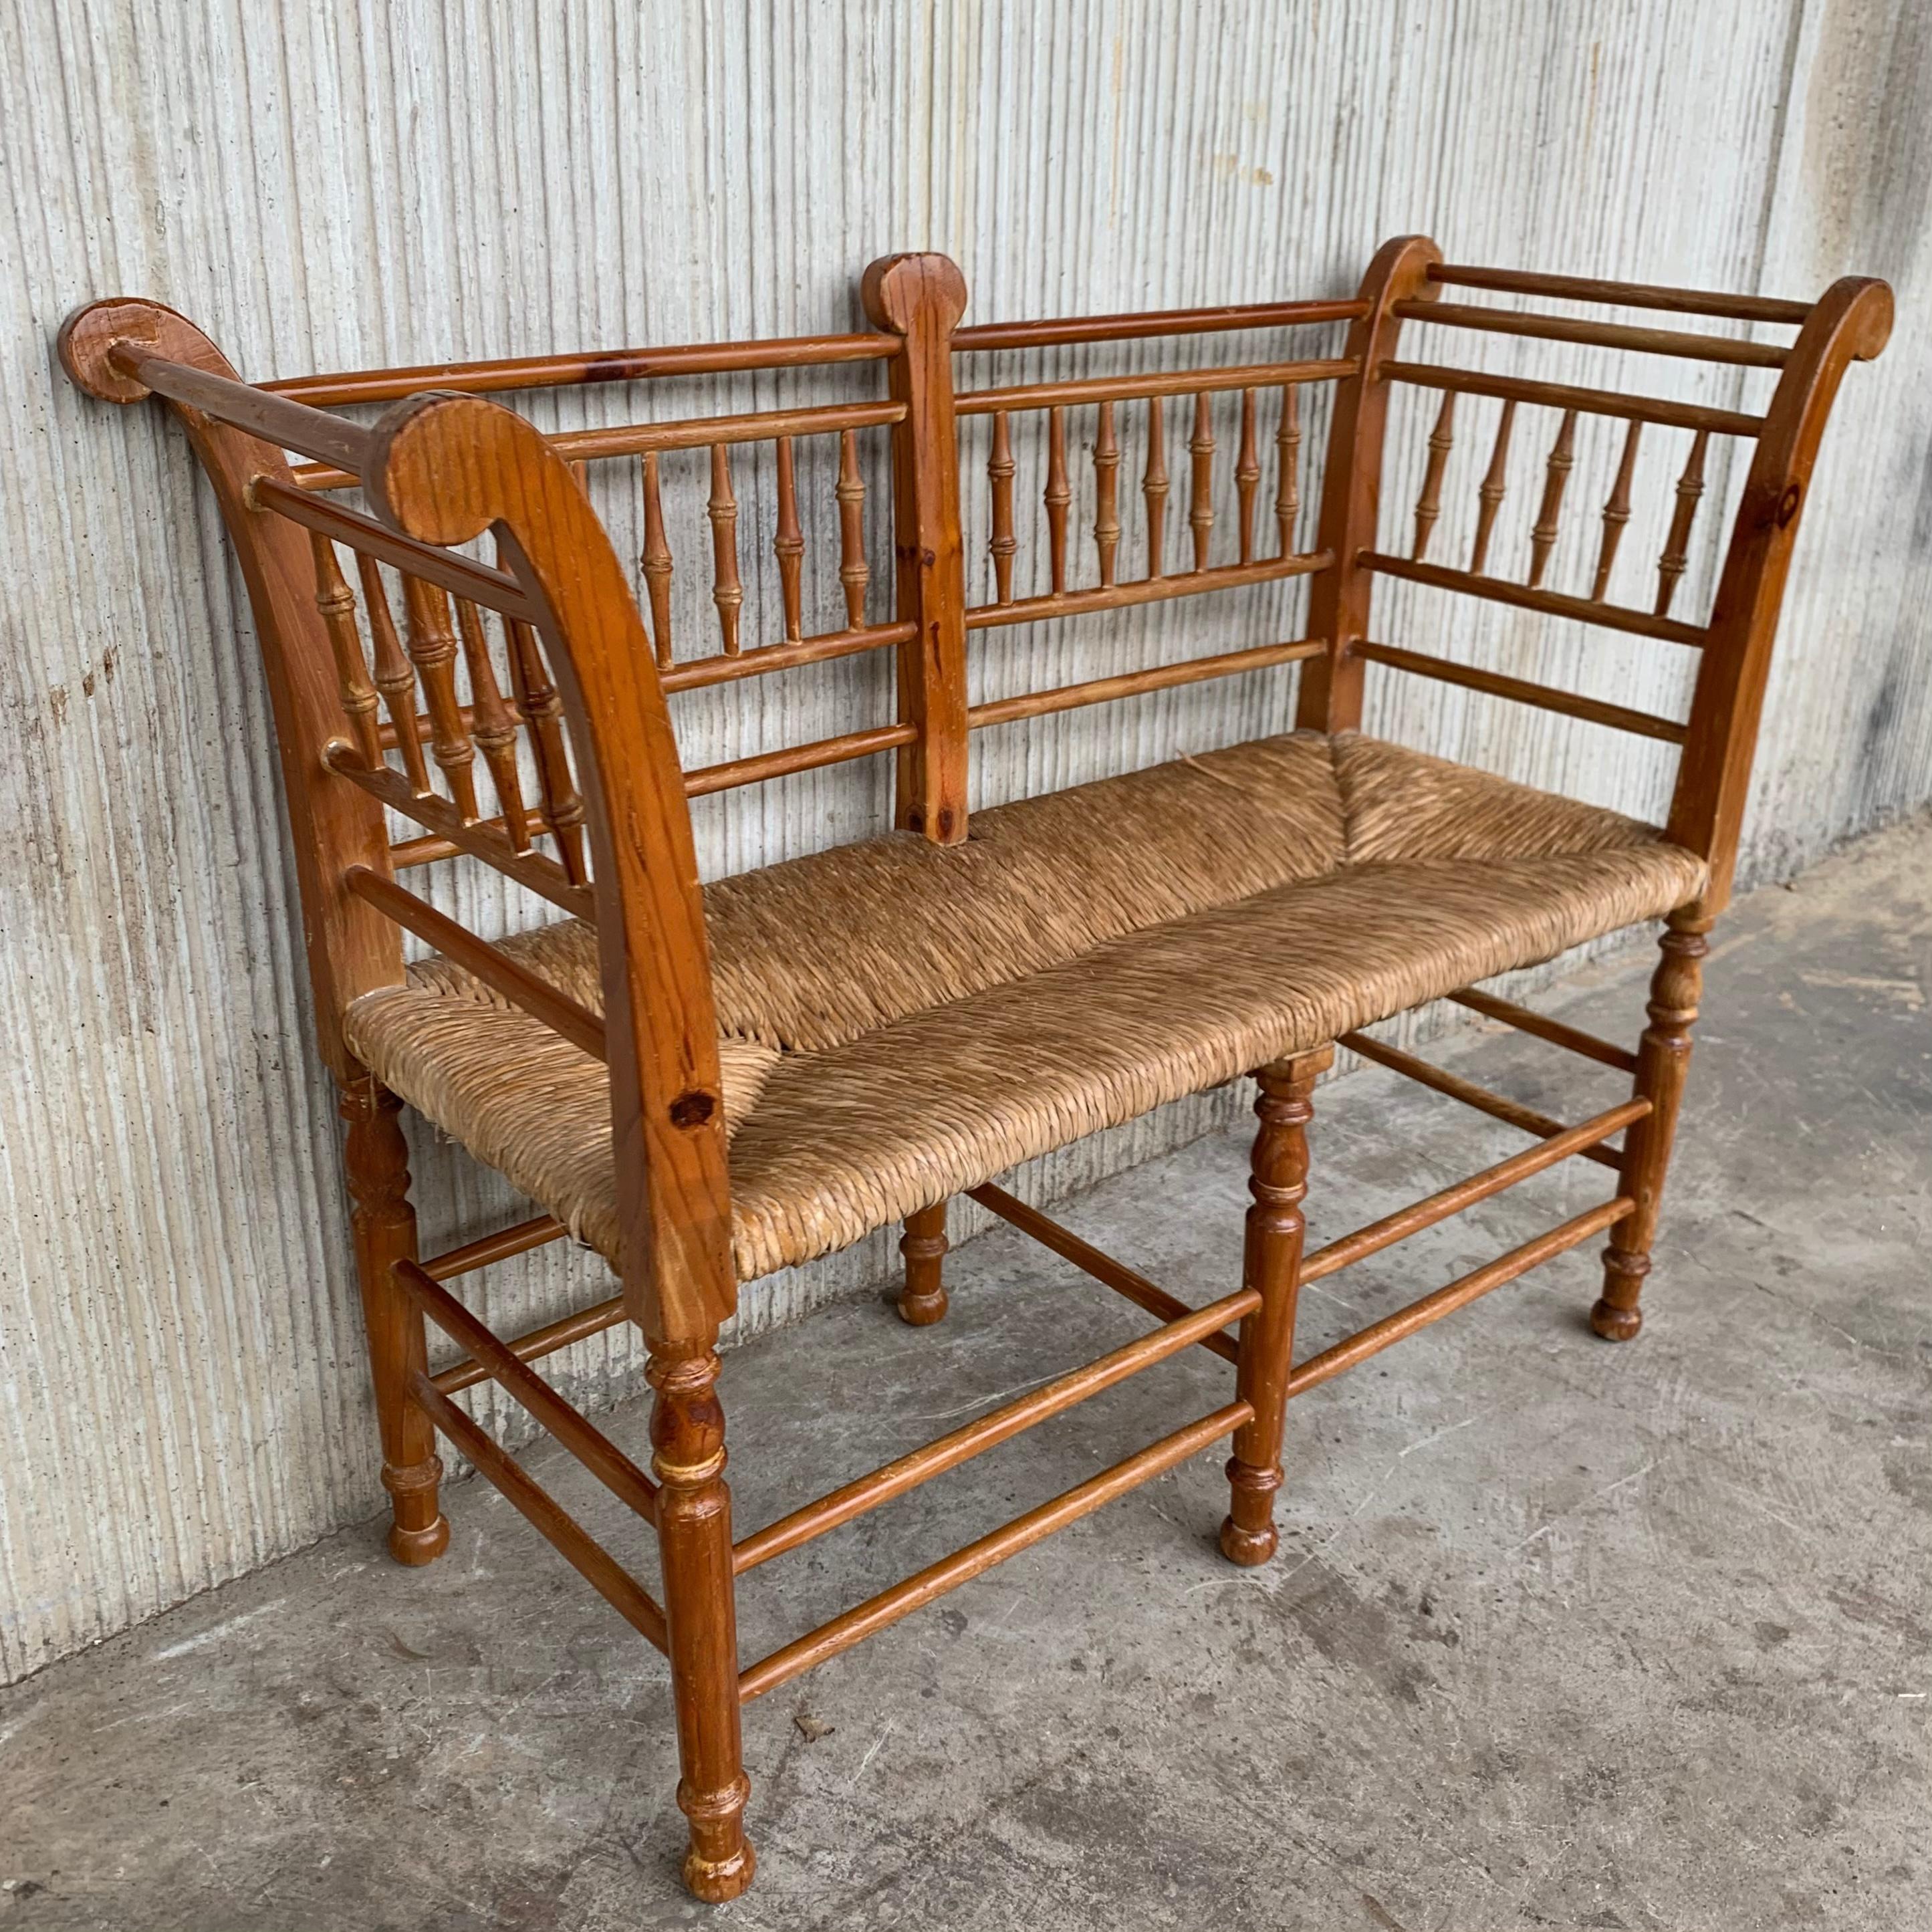 Spanish Colonial 20th Century Catalan Bench in Antique Pine with Caned Seat